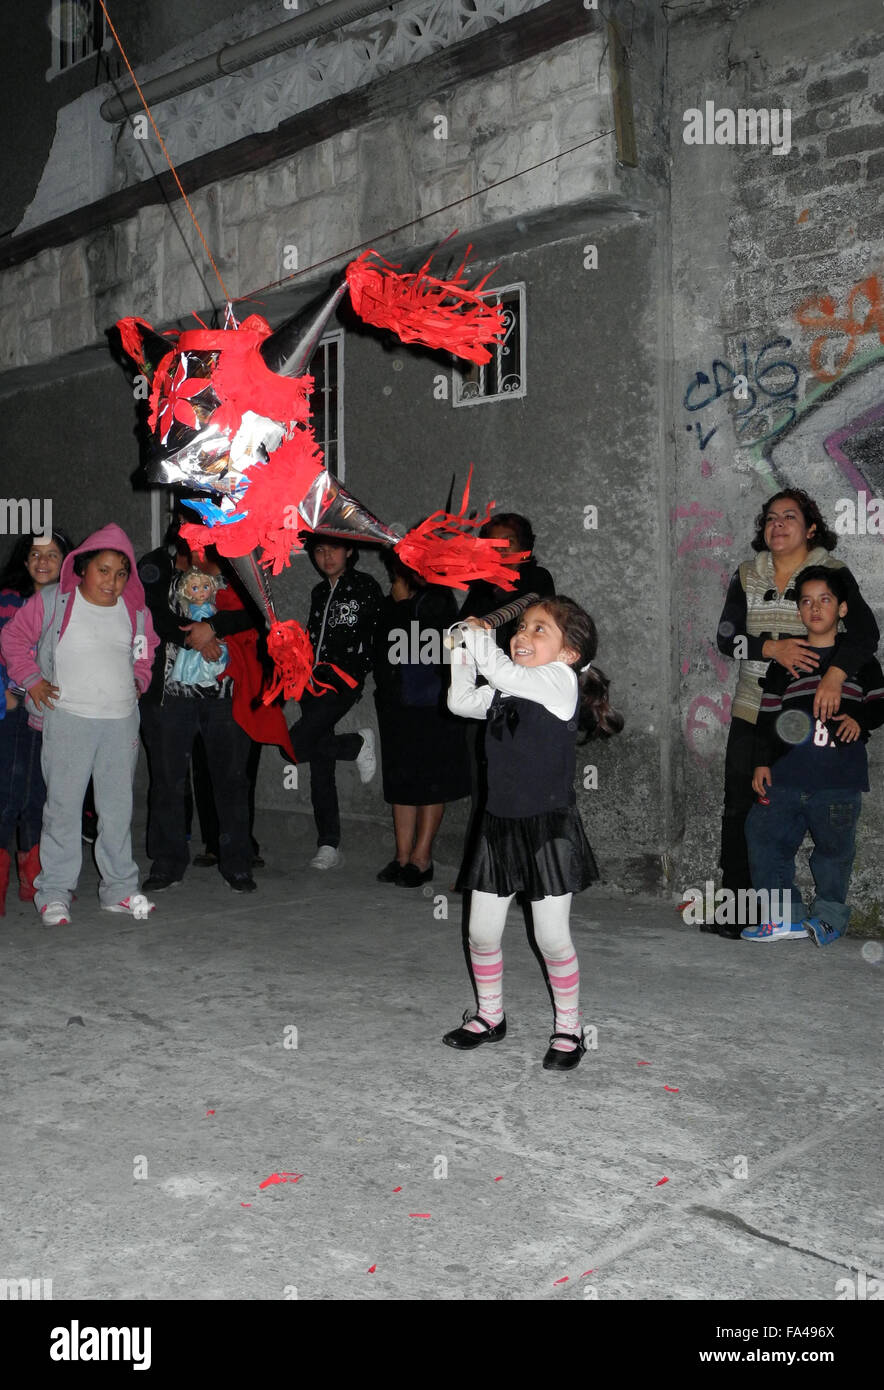 Mexico City, Mexico. 22nd Dec, 2014. Children hitting a pinata in the  Iztacalco district of Mexico City, Mexico, 22 December 2014. The cardboard  pinatas are filled with sweets. When they burst after